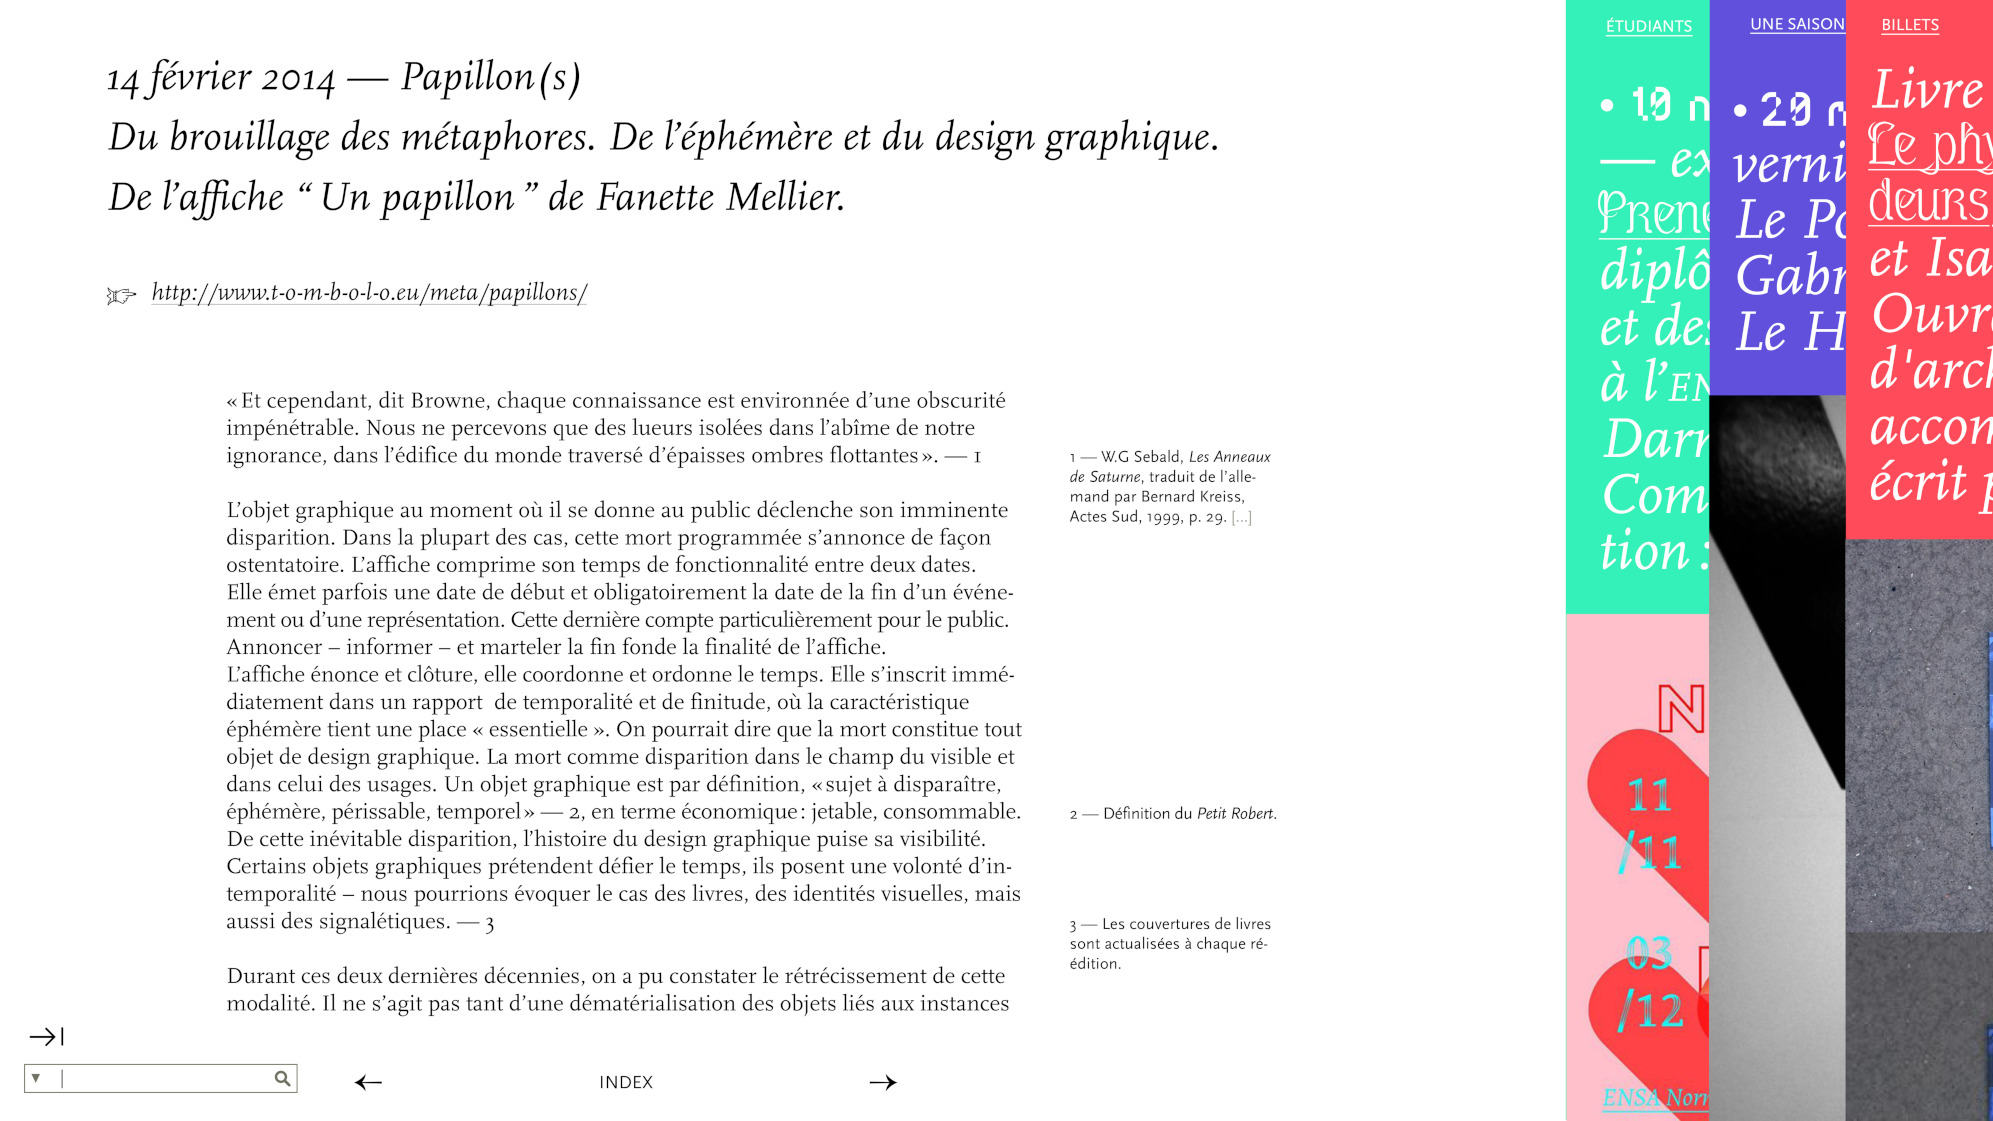 Papillon(s) text page on Fanette Mellier's work